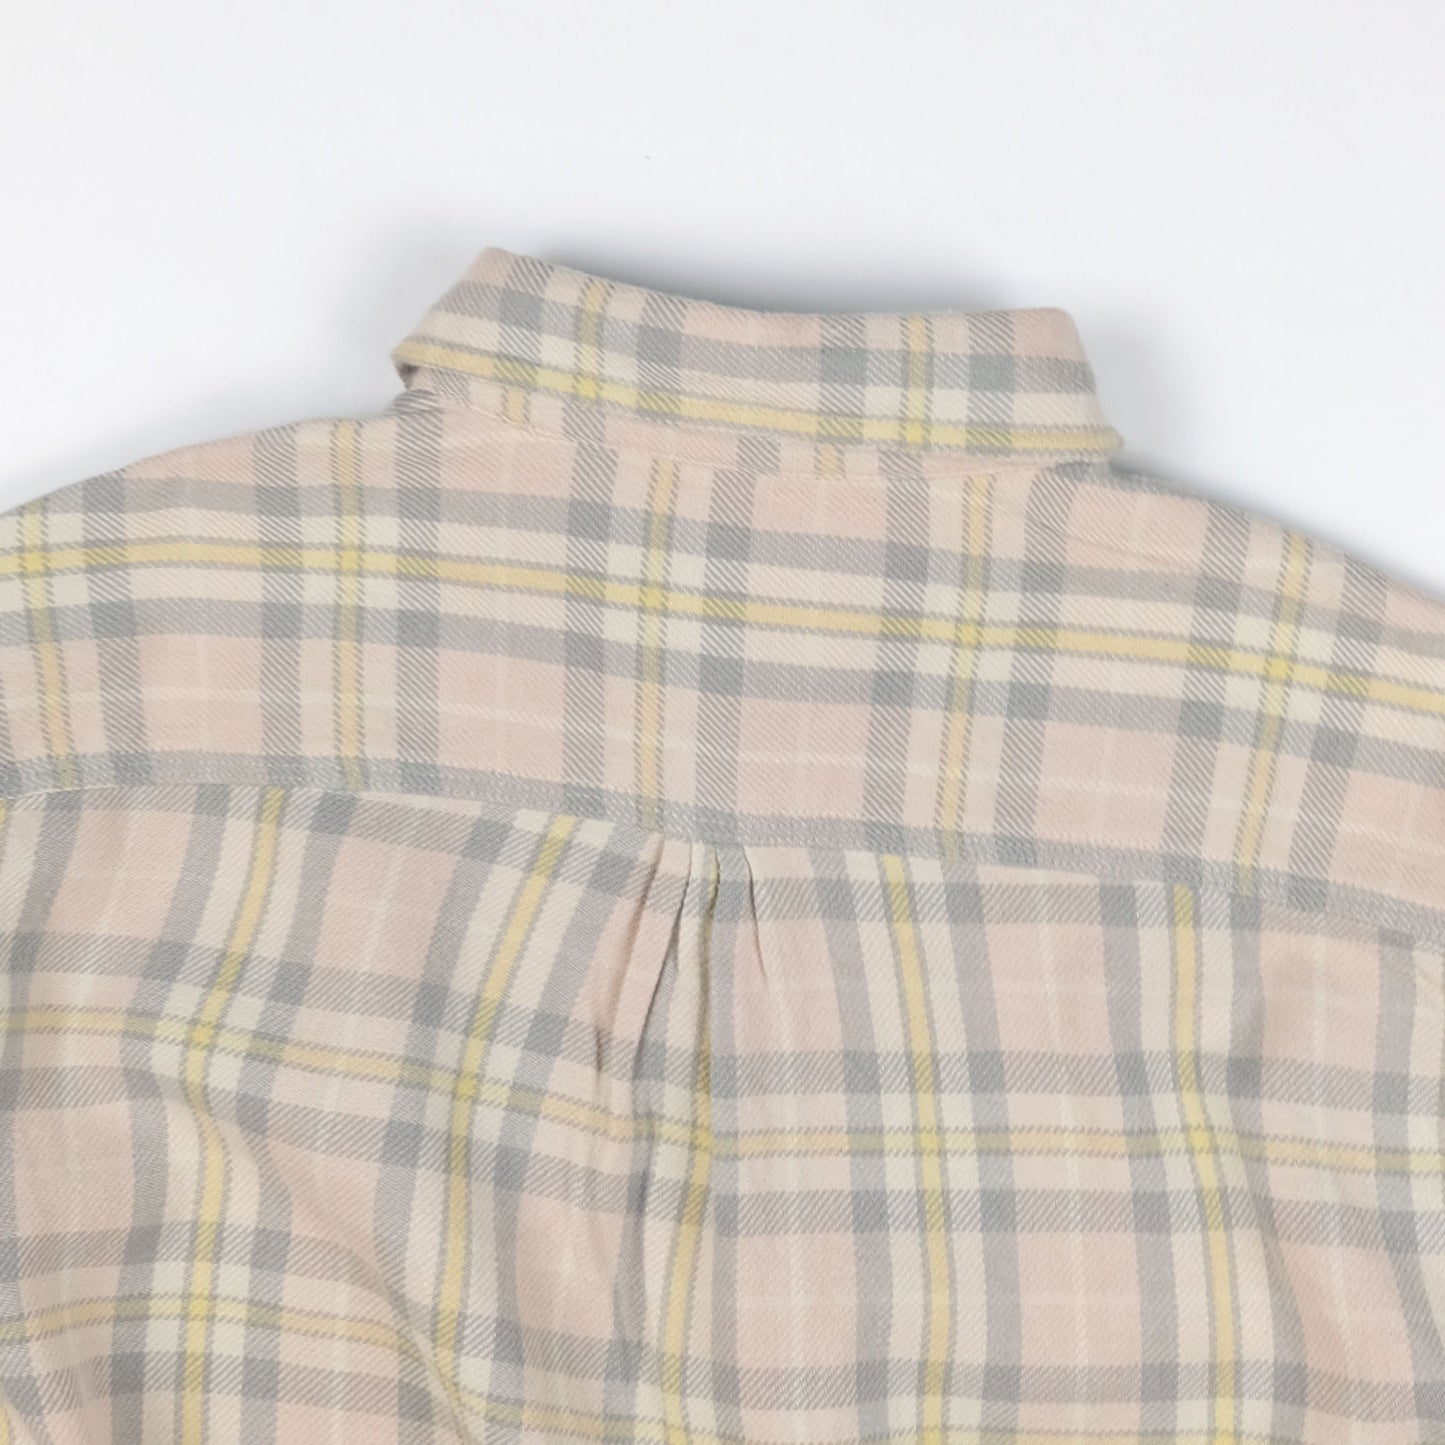 Washed Flannel Work Shirt in Abiquiu Sunset